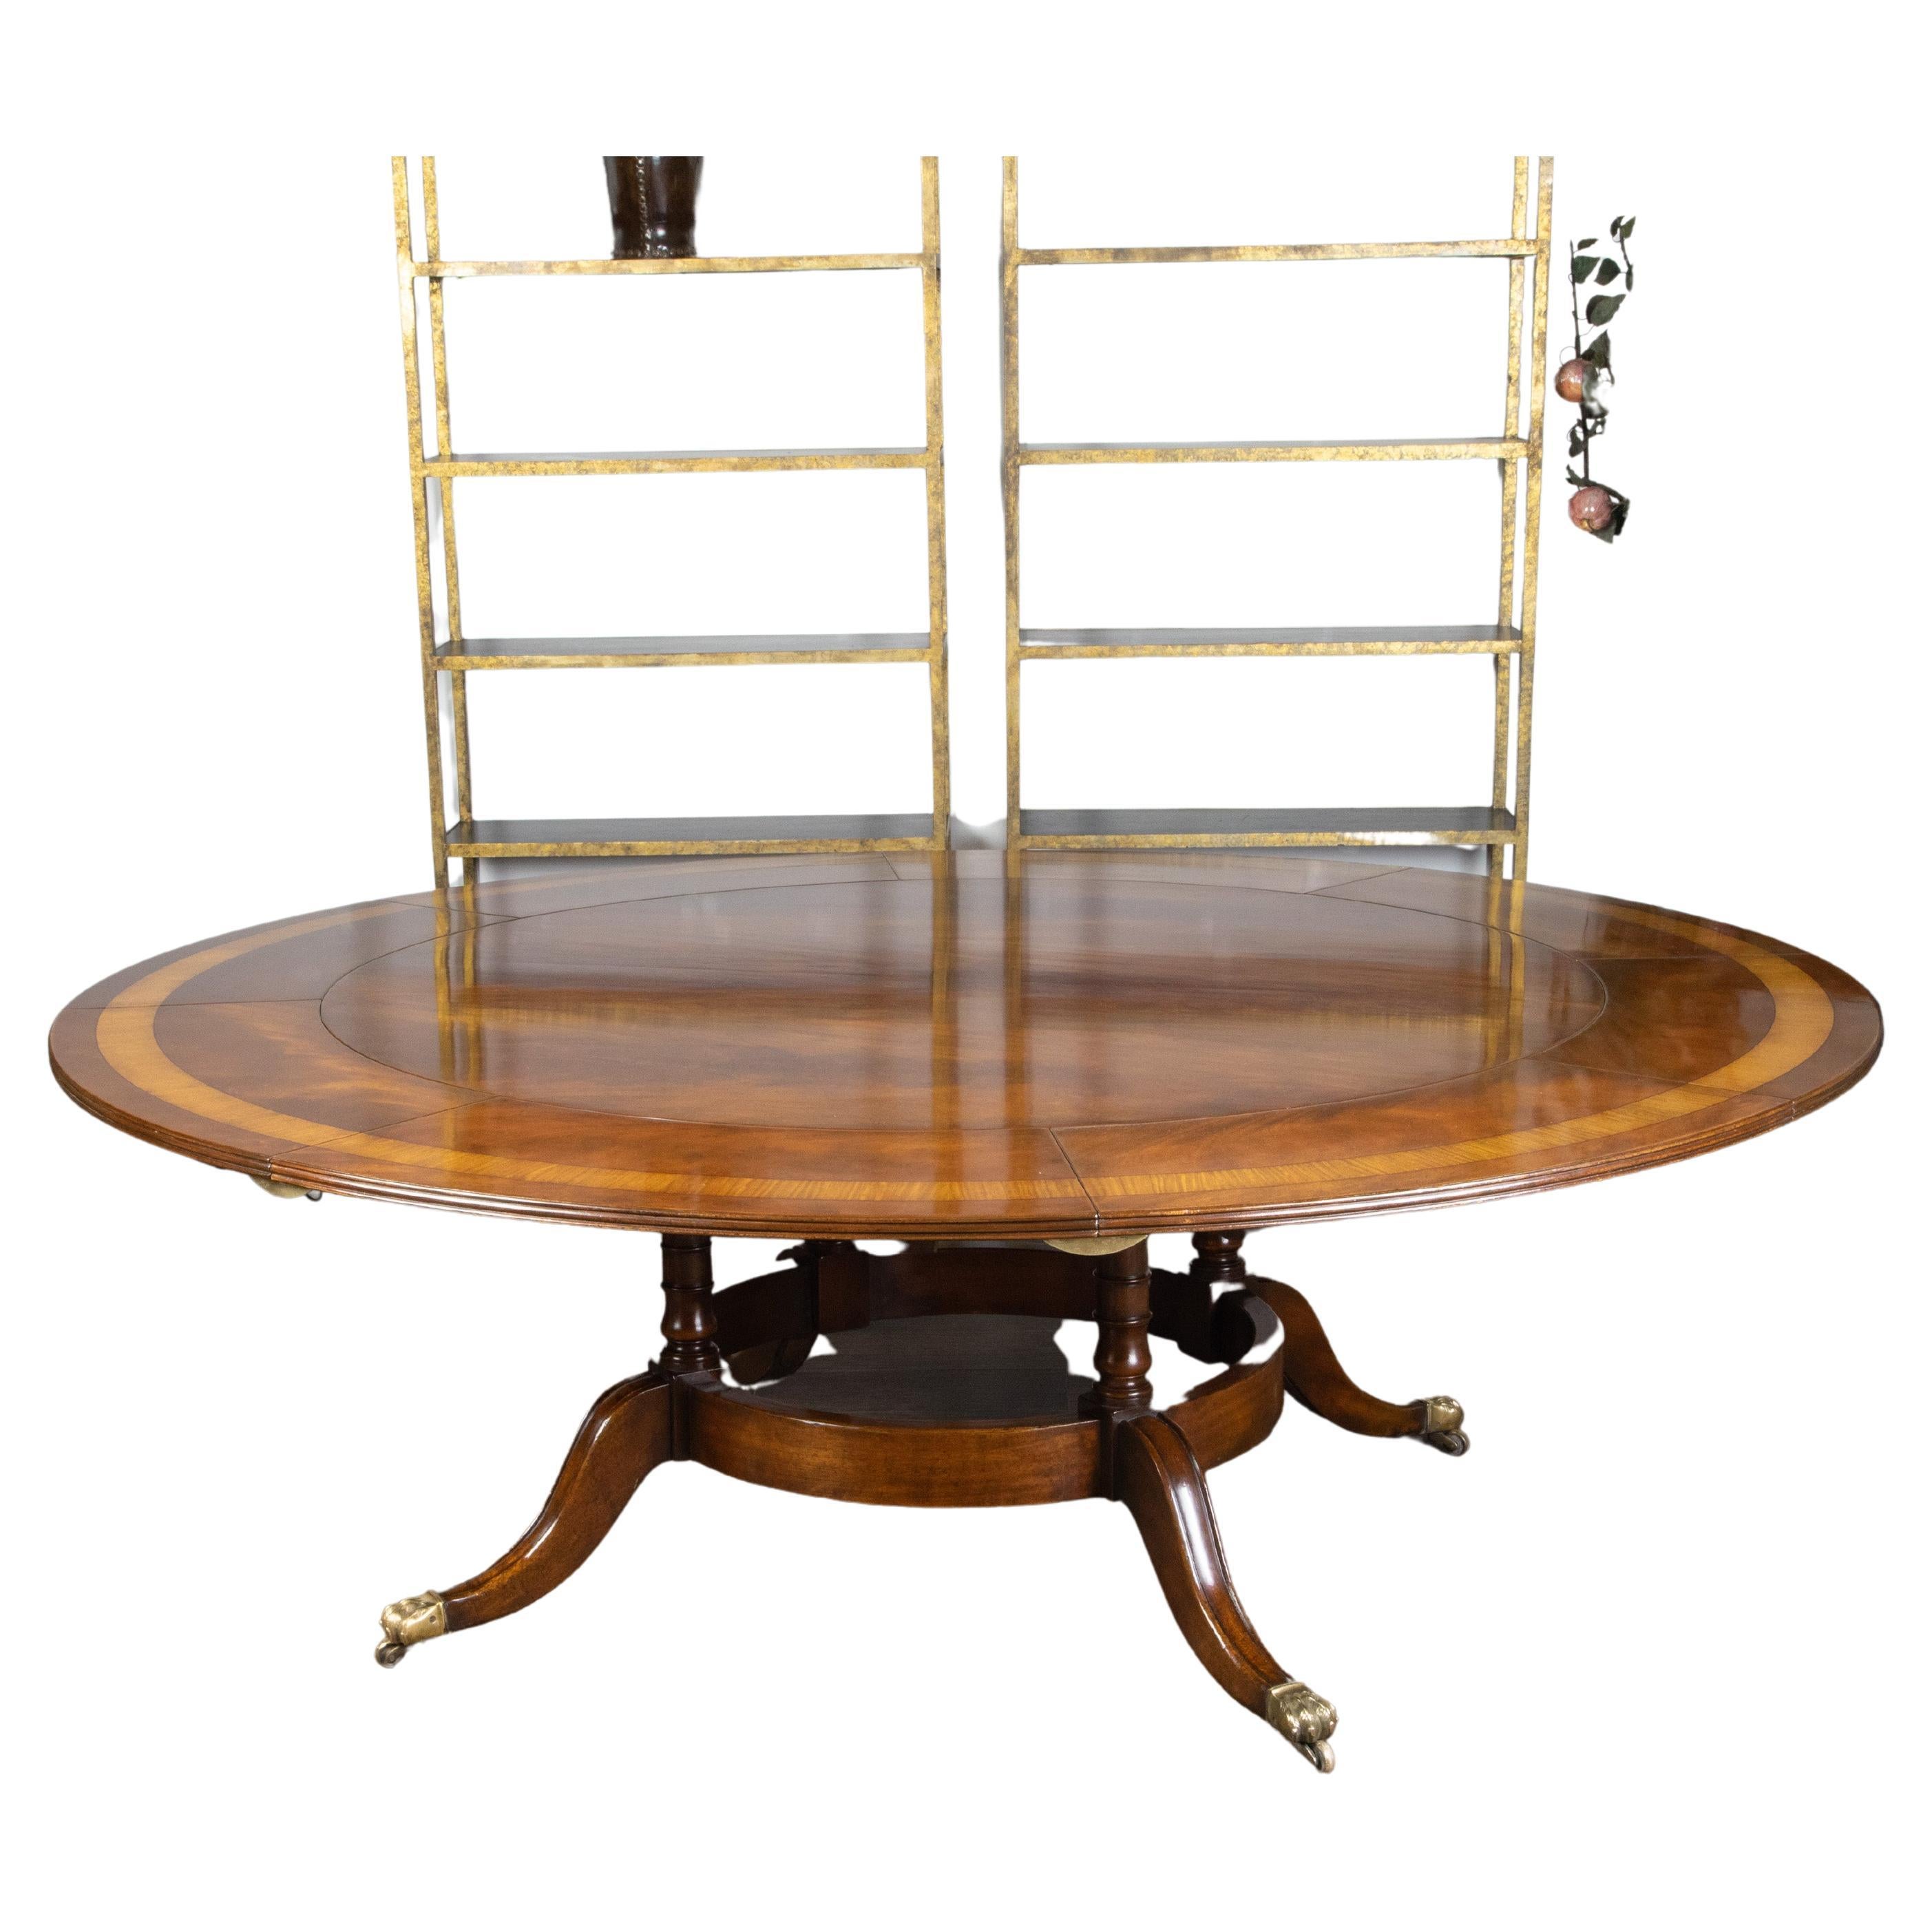 An English mahogany dining room table from the mid 20th century, with eight leaves and cross-banding. Created in England during the Midcentury period, this mahogany dining room table features a circular top measuring 60